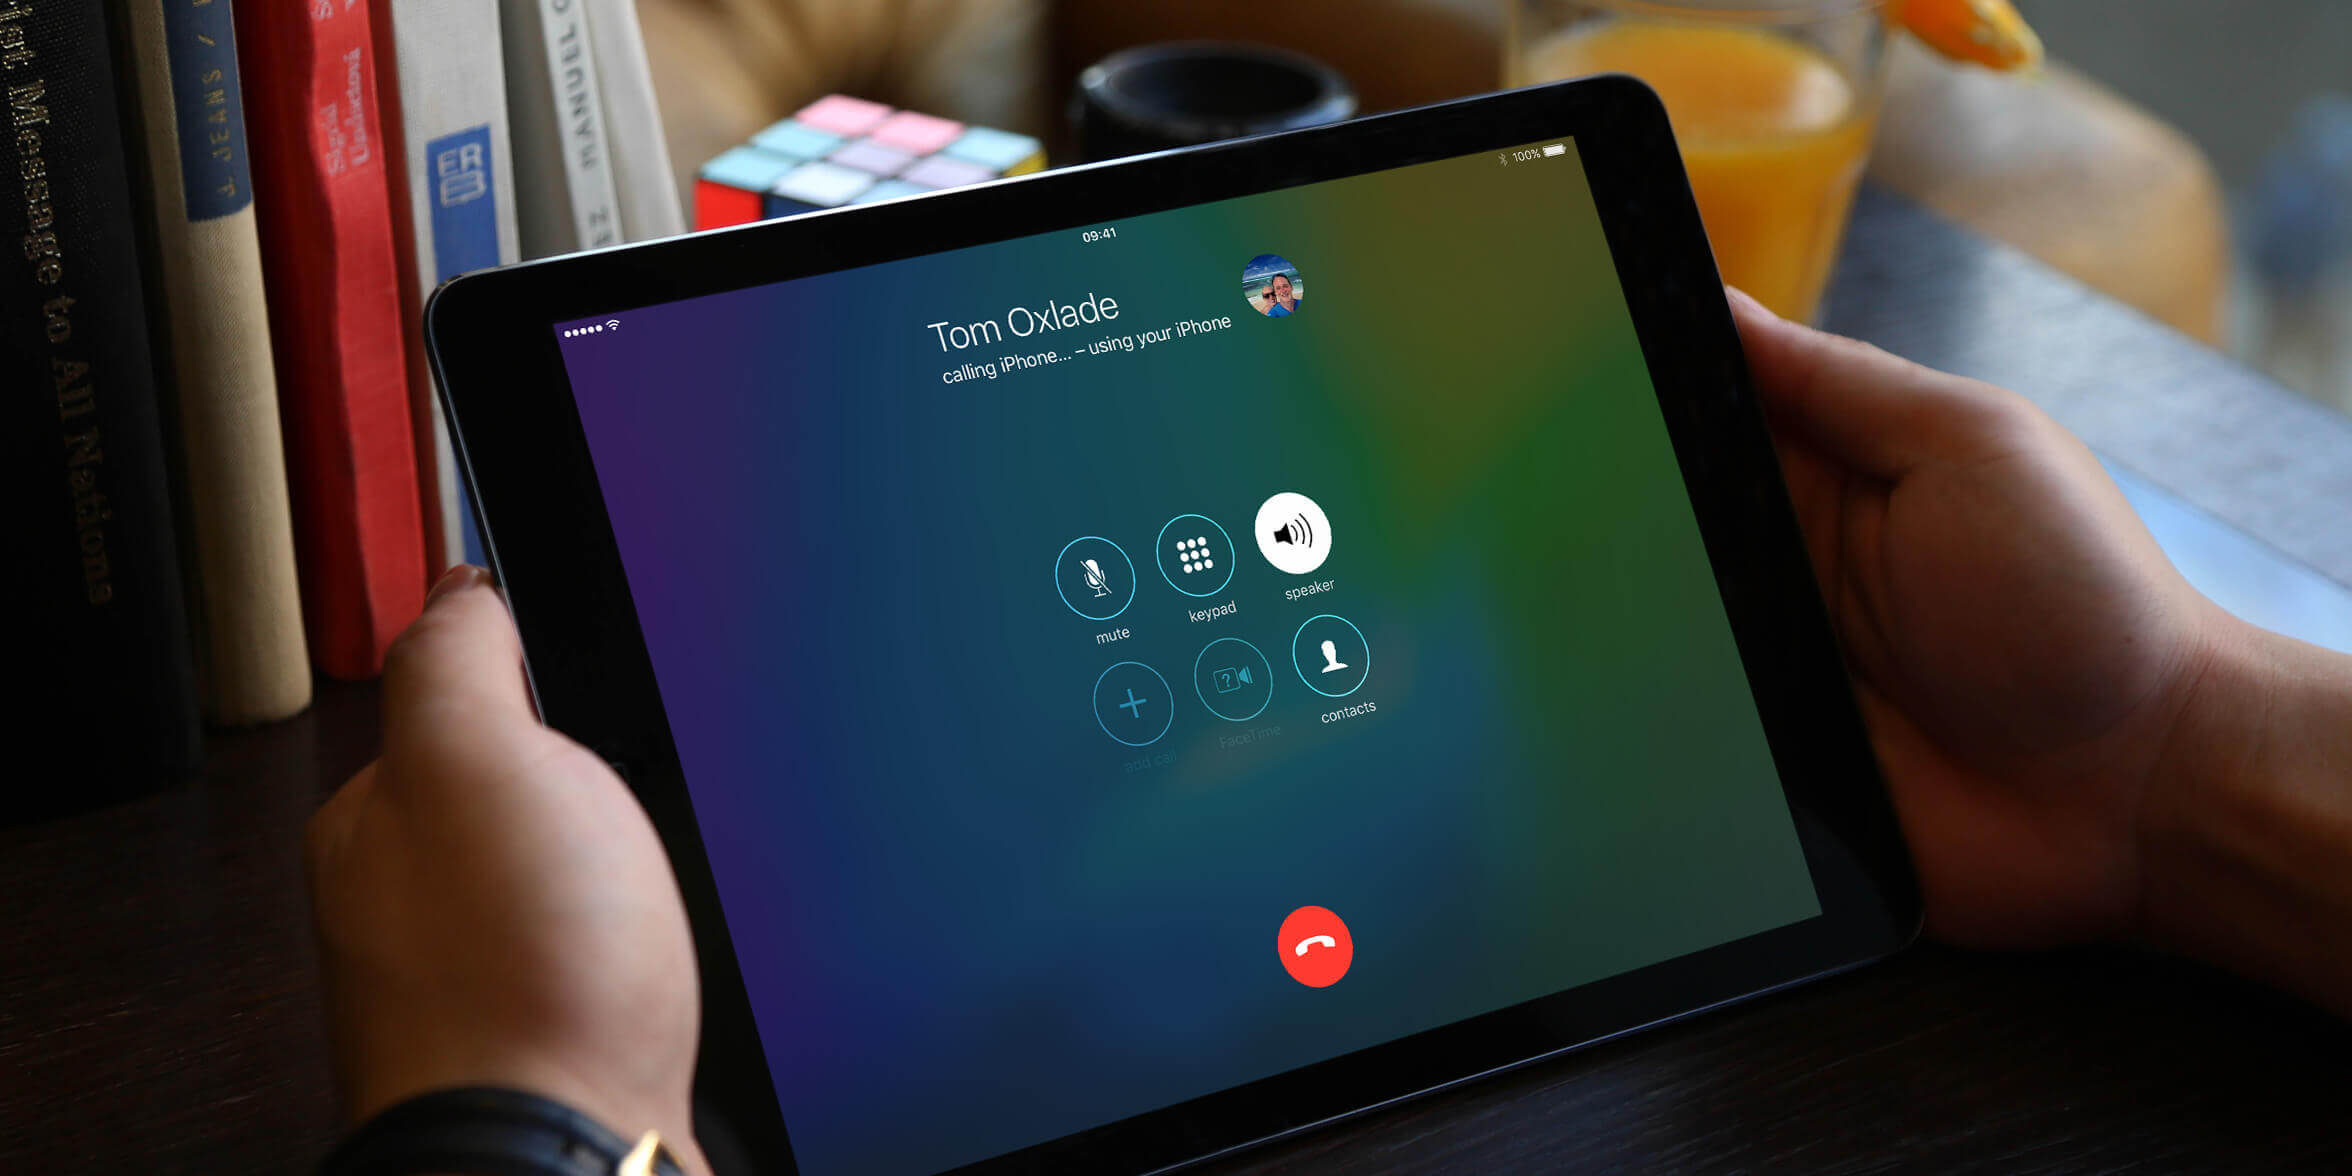 How To Make Calls On A Tablet